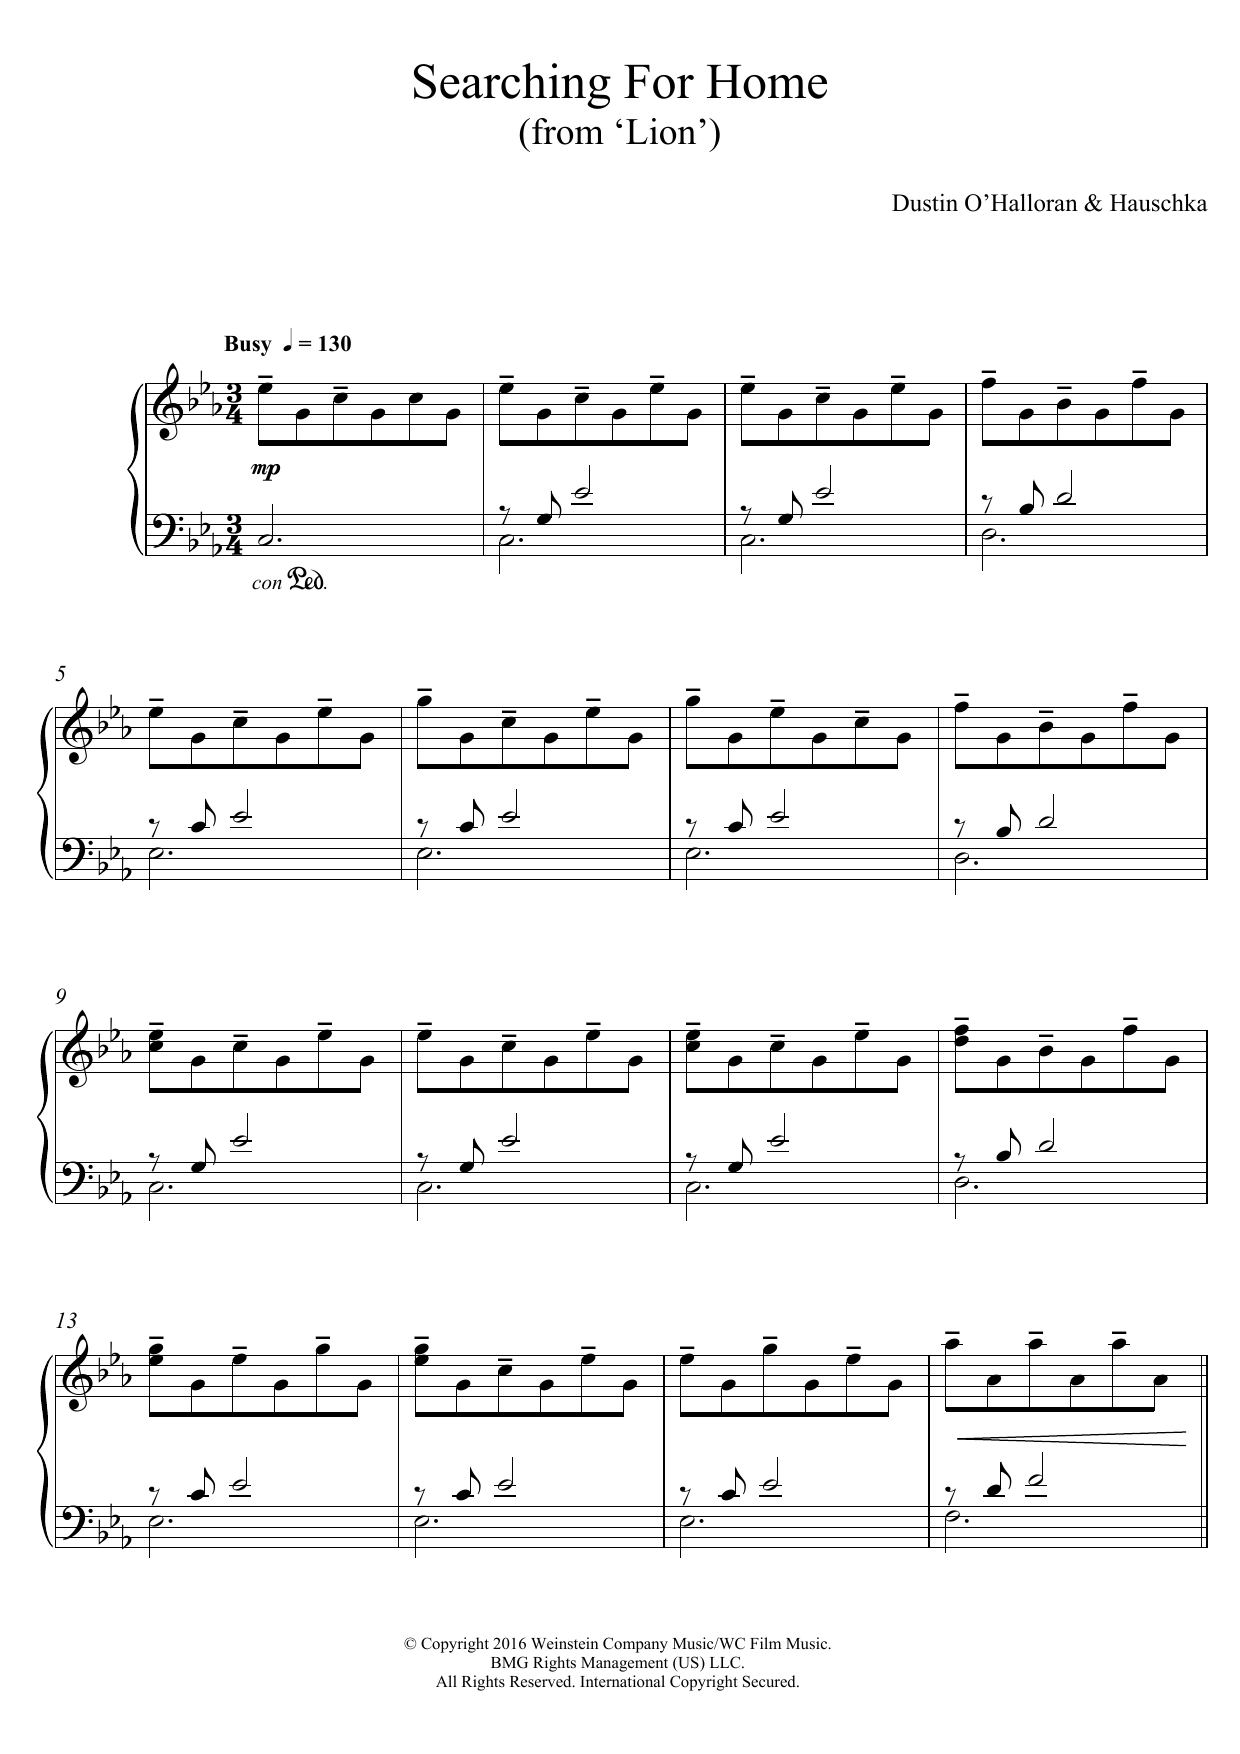 Download Dustin O'Halloran & Hauschka Searching for Home (from 'Lion') Sheet Music